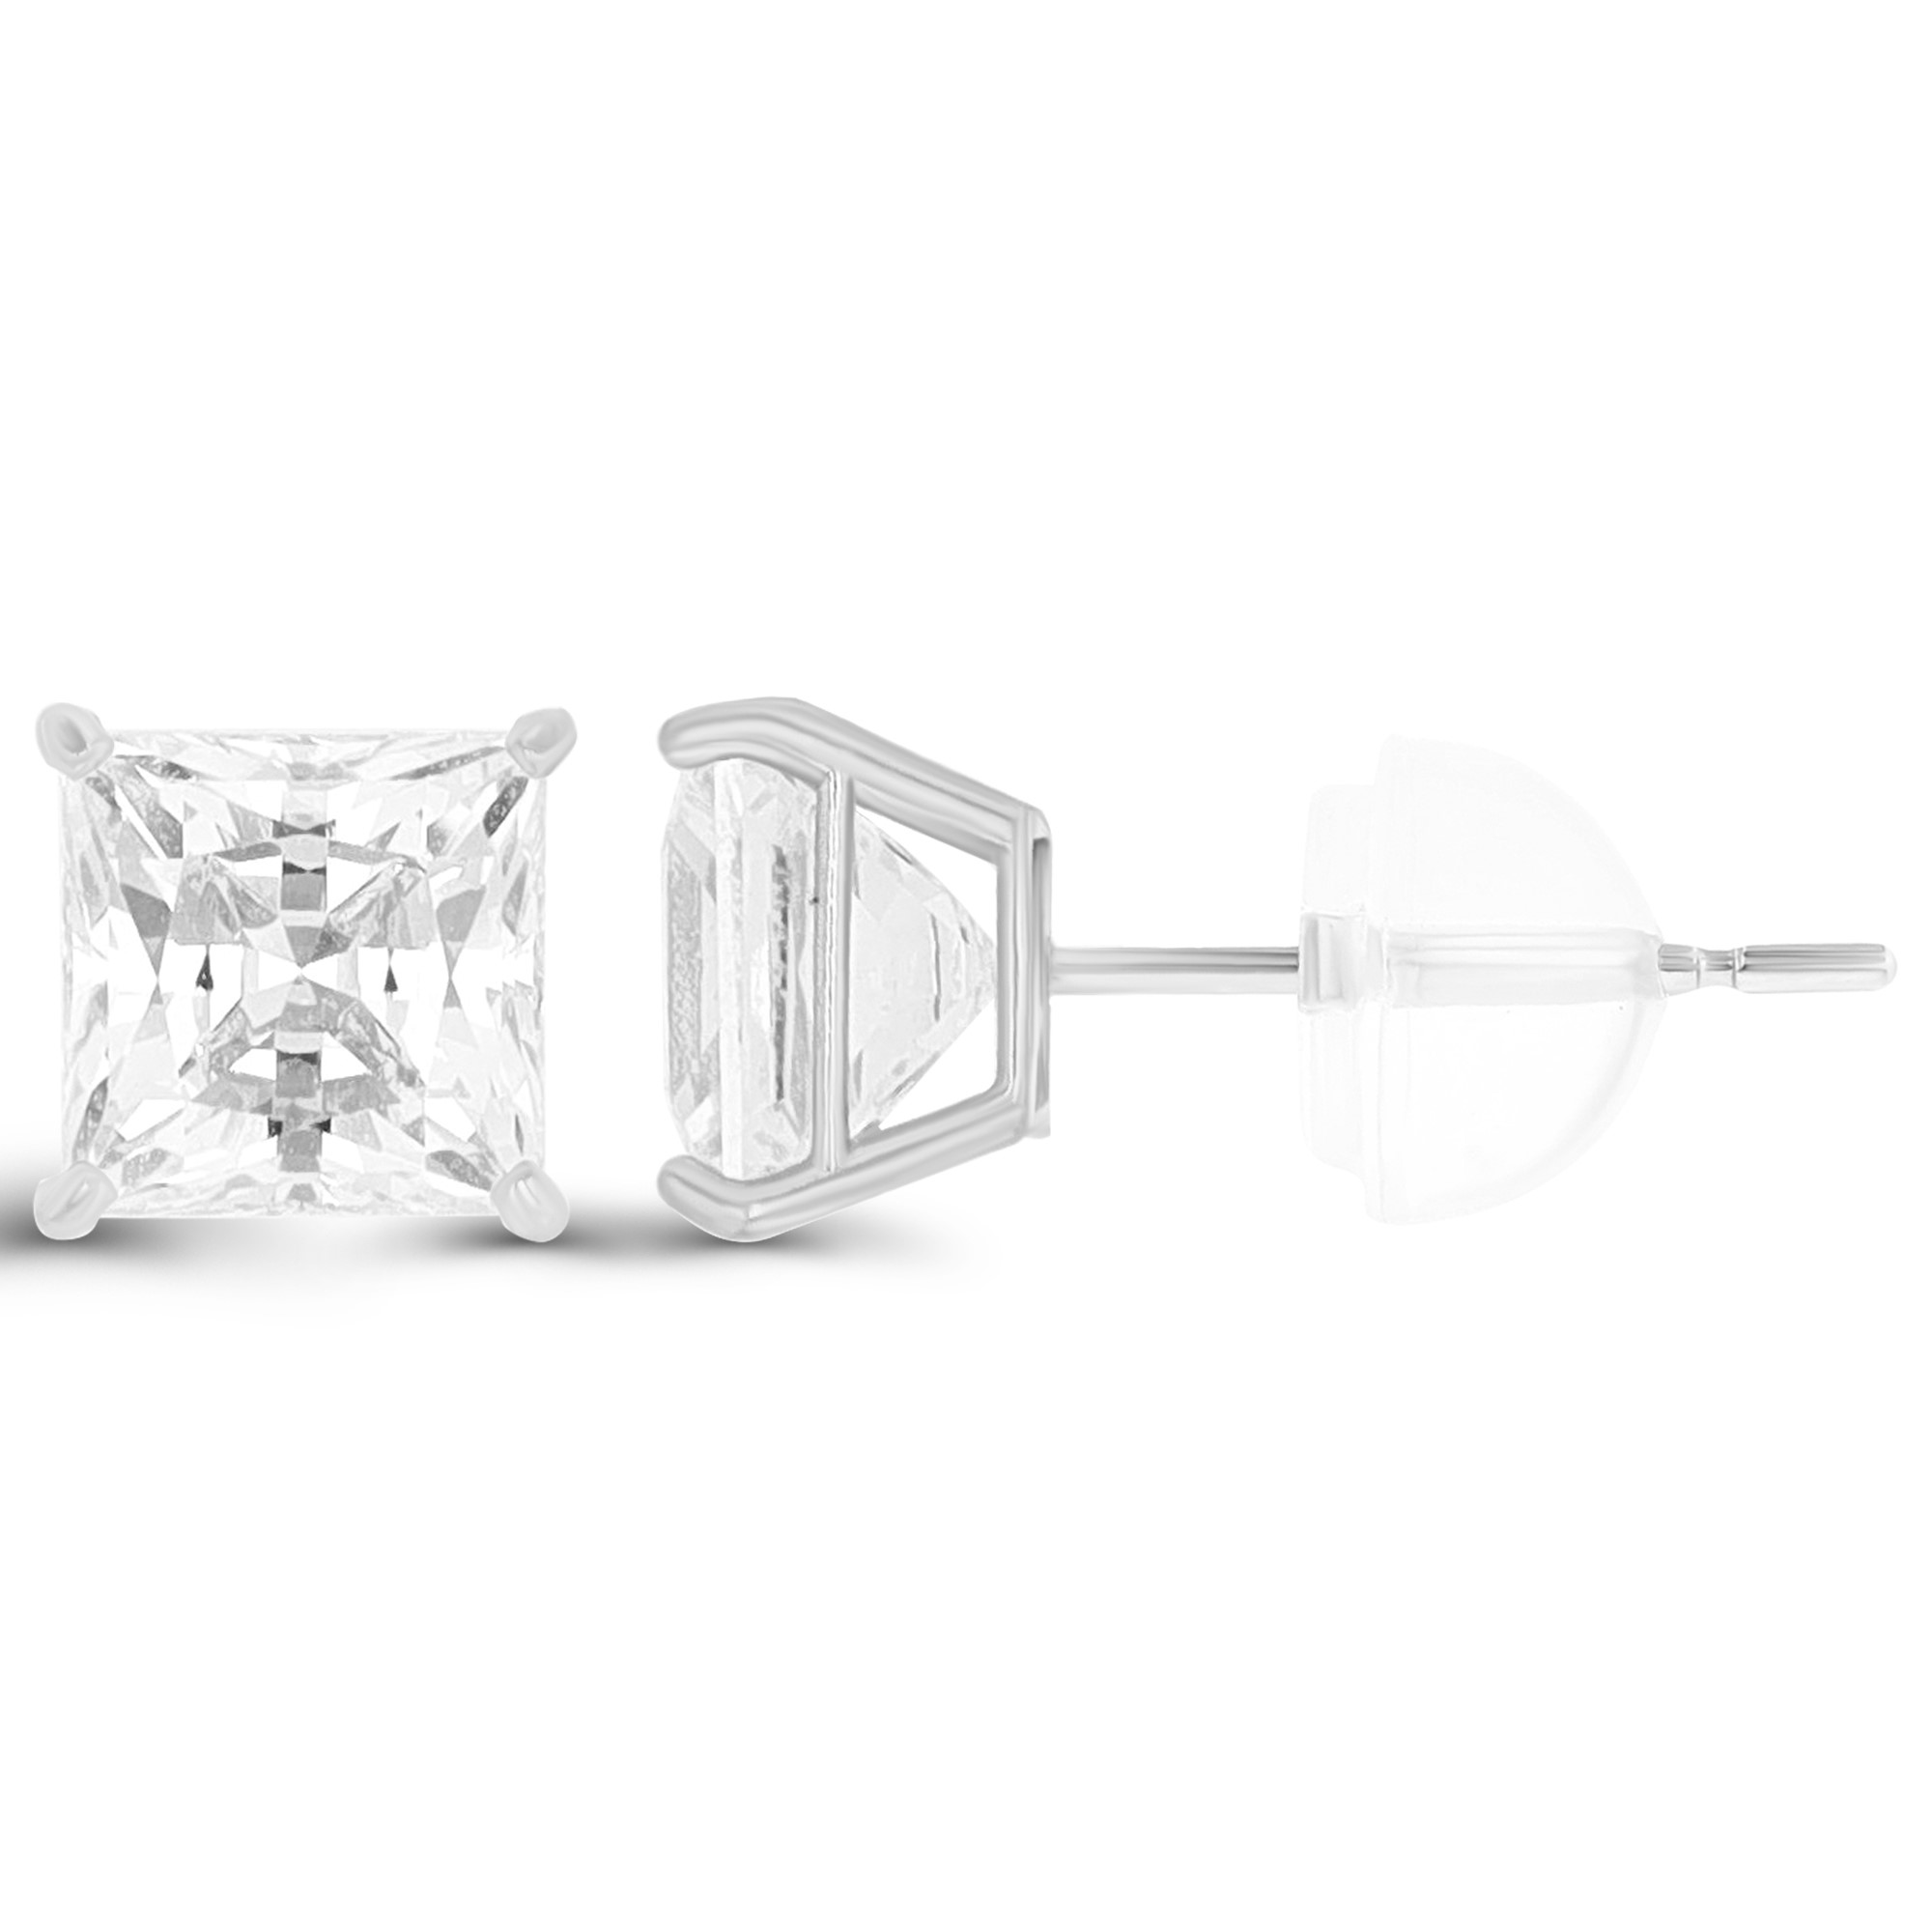 14K White Gold 7mm Sq White Swarovski Zirconia 4-Prong Cast Basket Solitaire Earring & Silicone Bubble Back